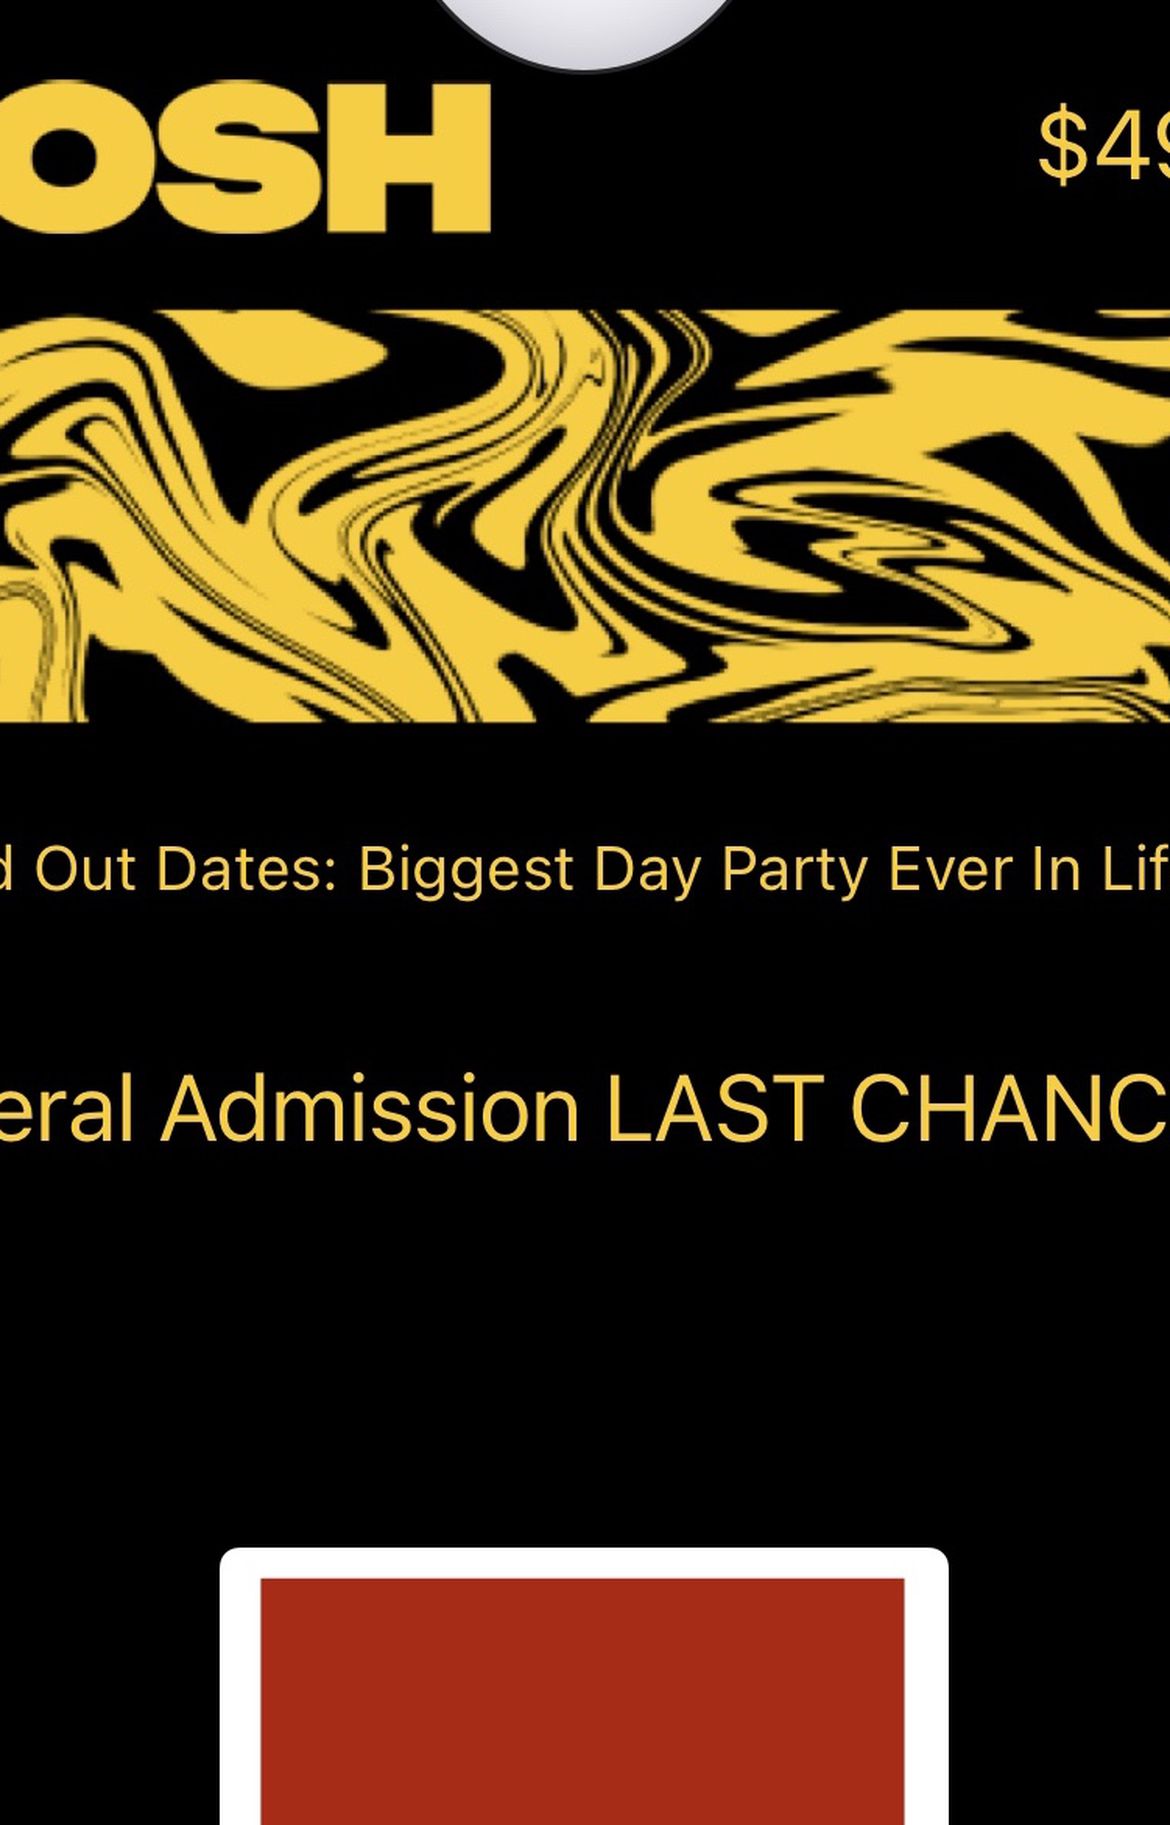 Souled Out Dates: Biggest Day Party Ever In Life 4/13